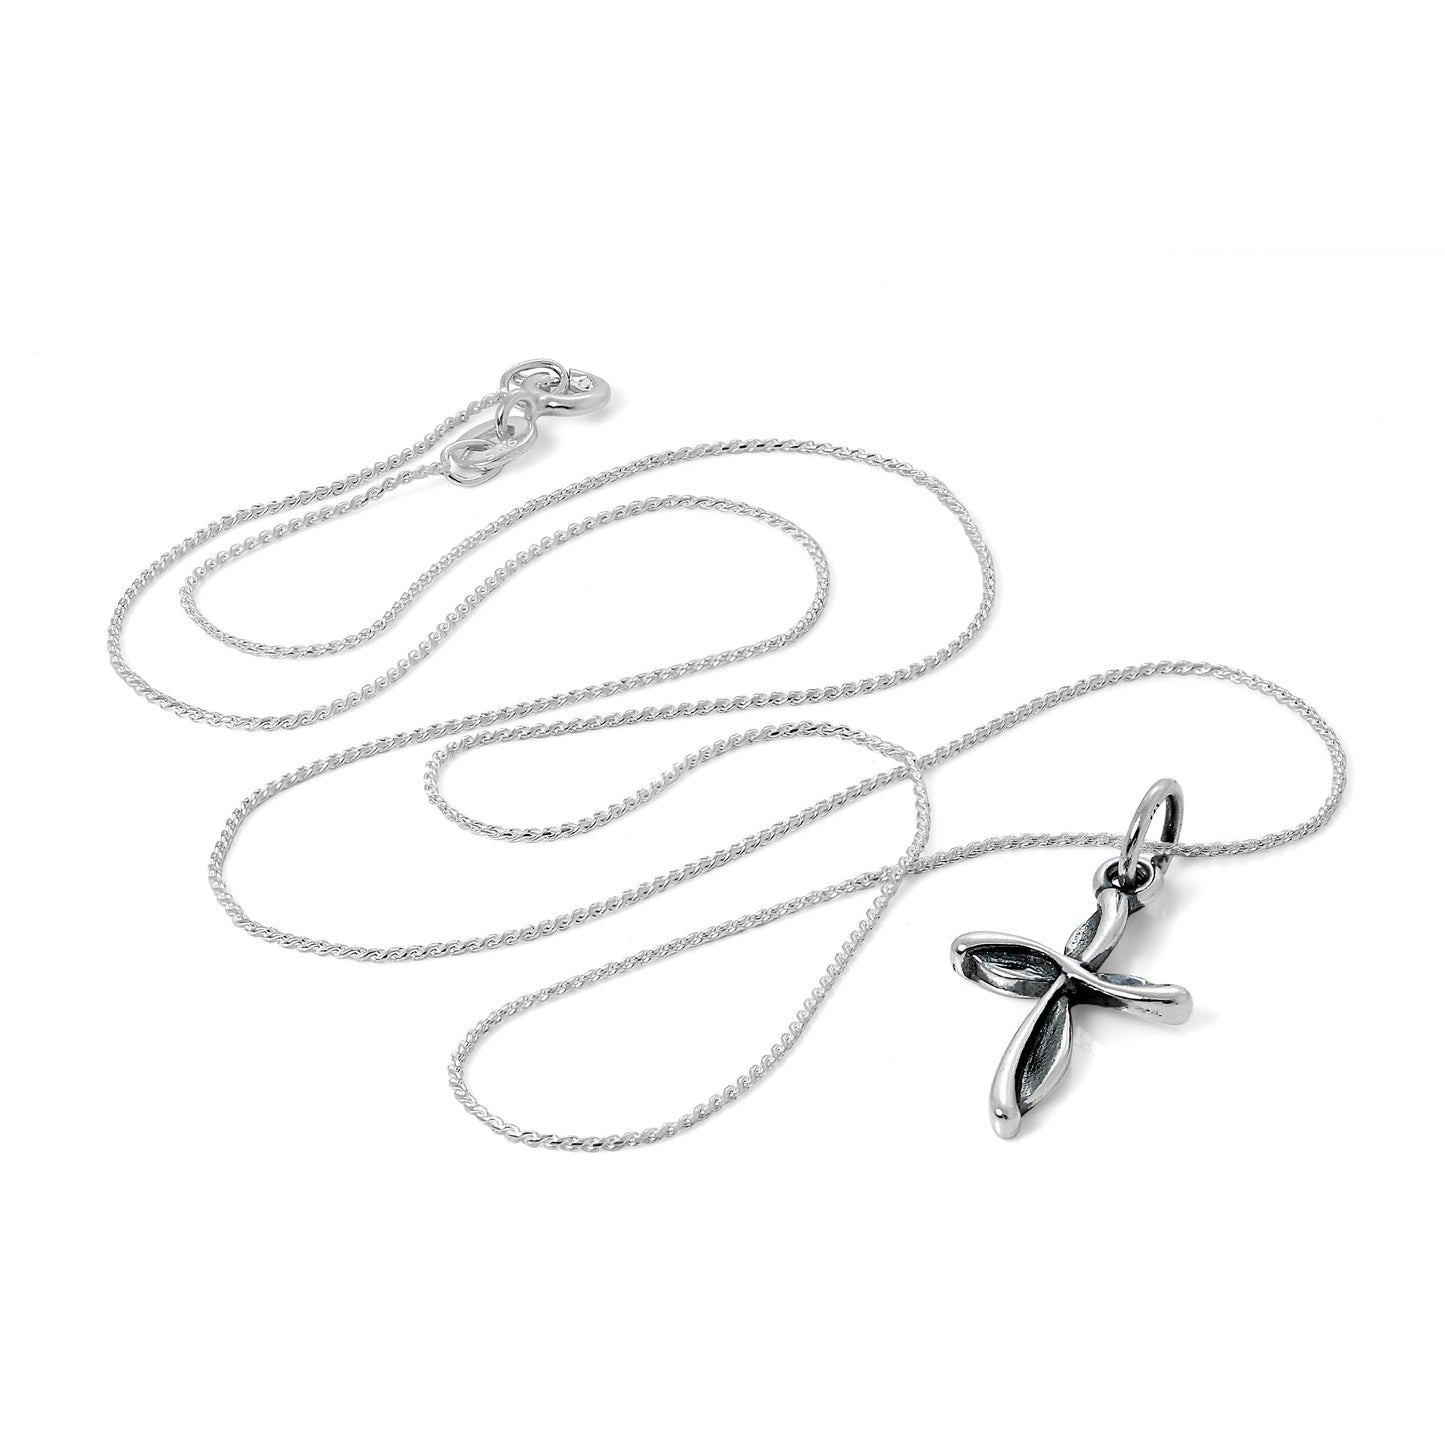 Sterling Silver Twisted Cross Pendant Necklace 16 - 22 Inches